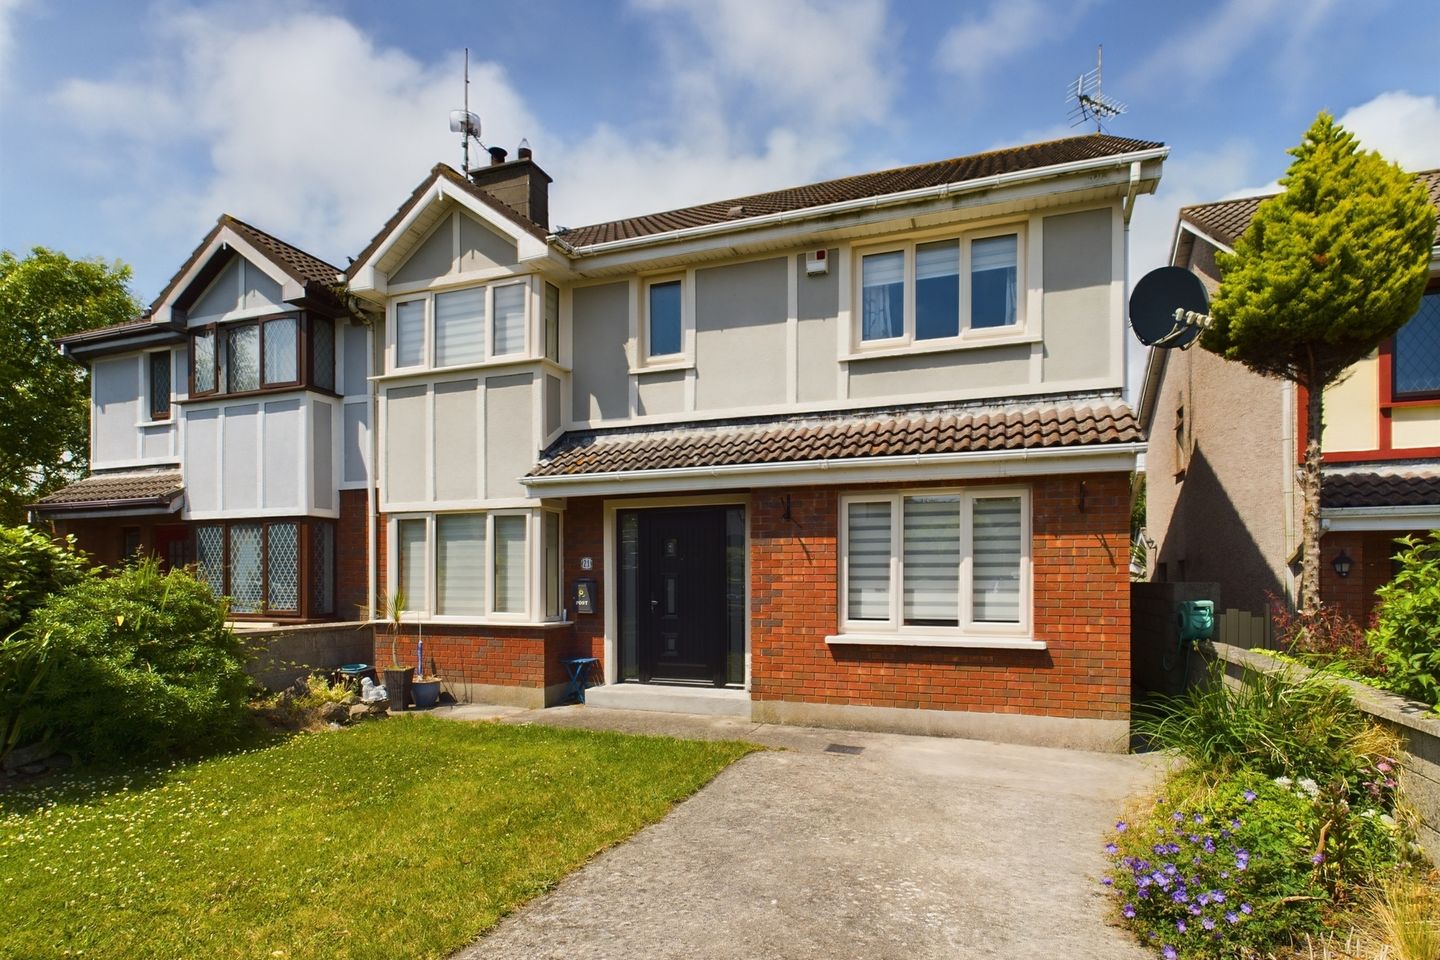 21 Crobally Heights, Tramore, Co. Waterford, X91CX27